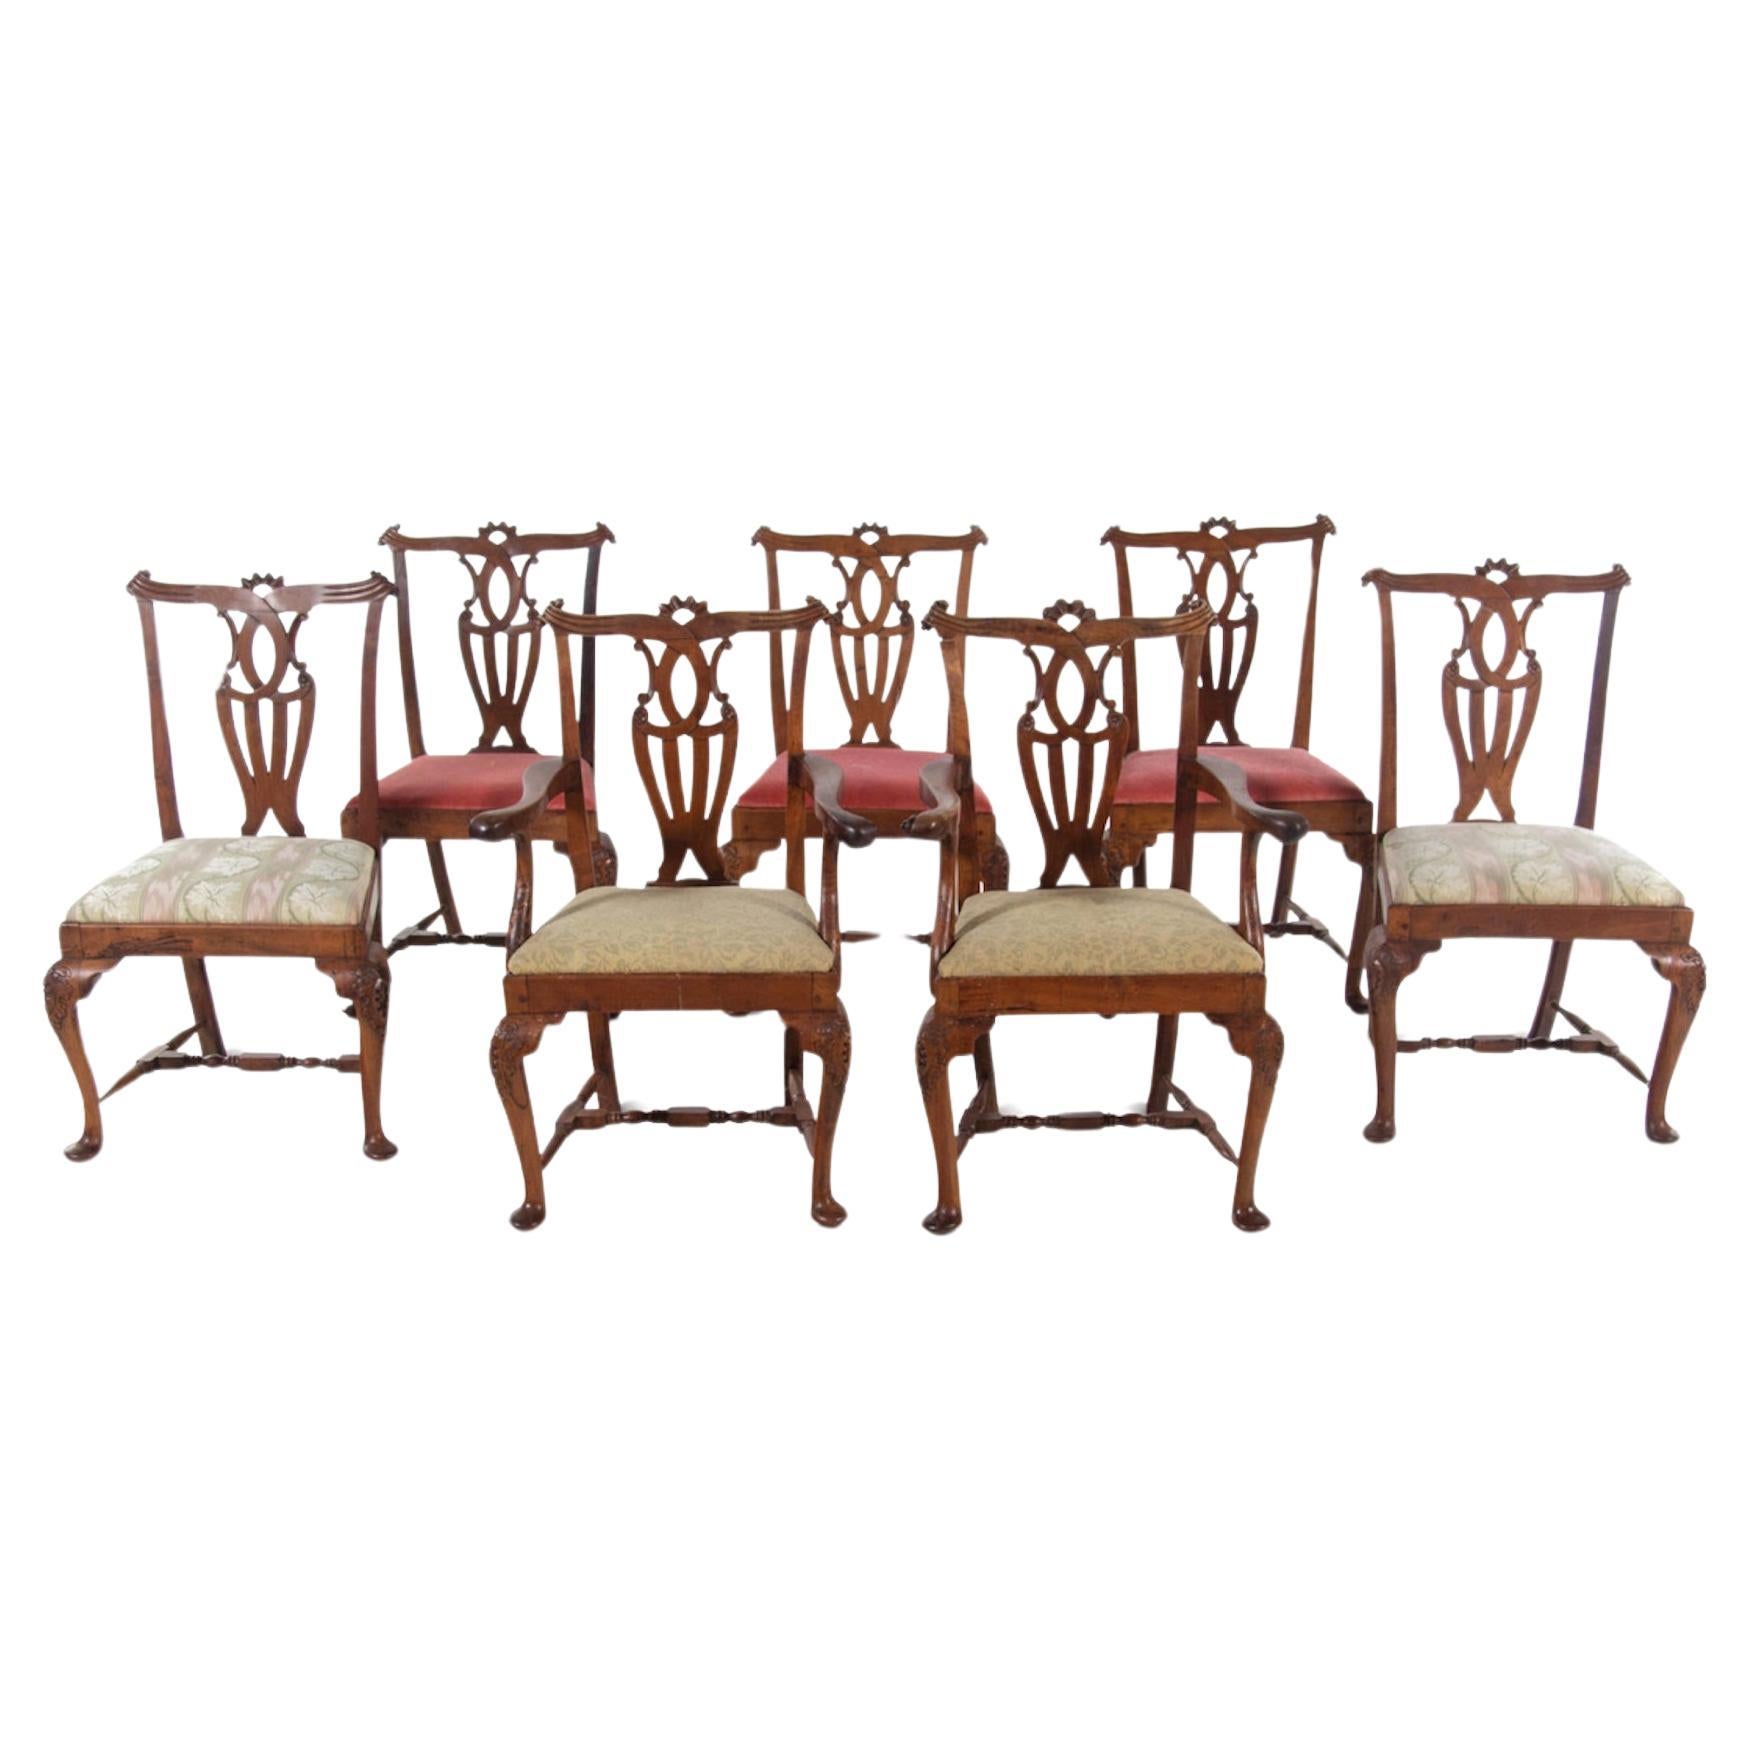 A Set of Seven George III Irish Walnut Dining Chairs 18th Century, Great Scale. For Sale